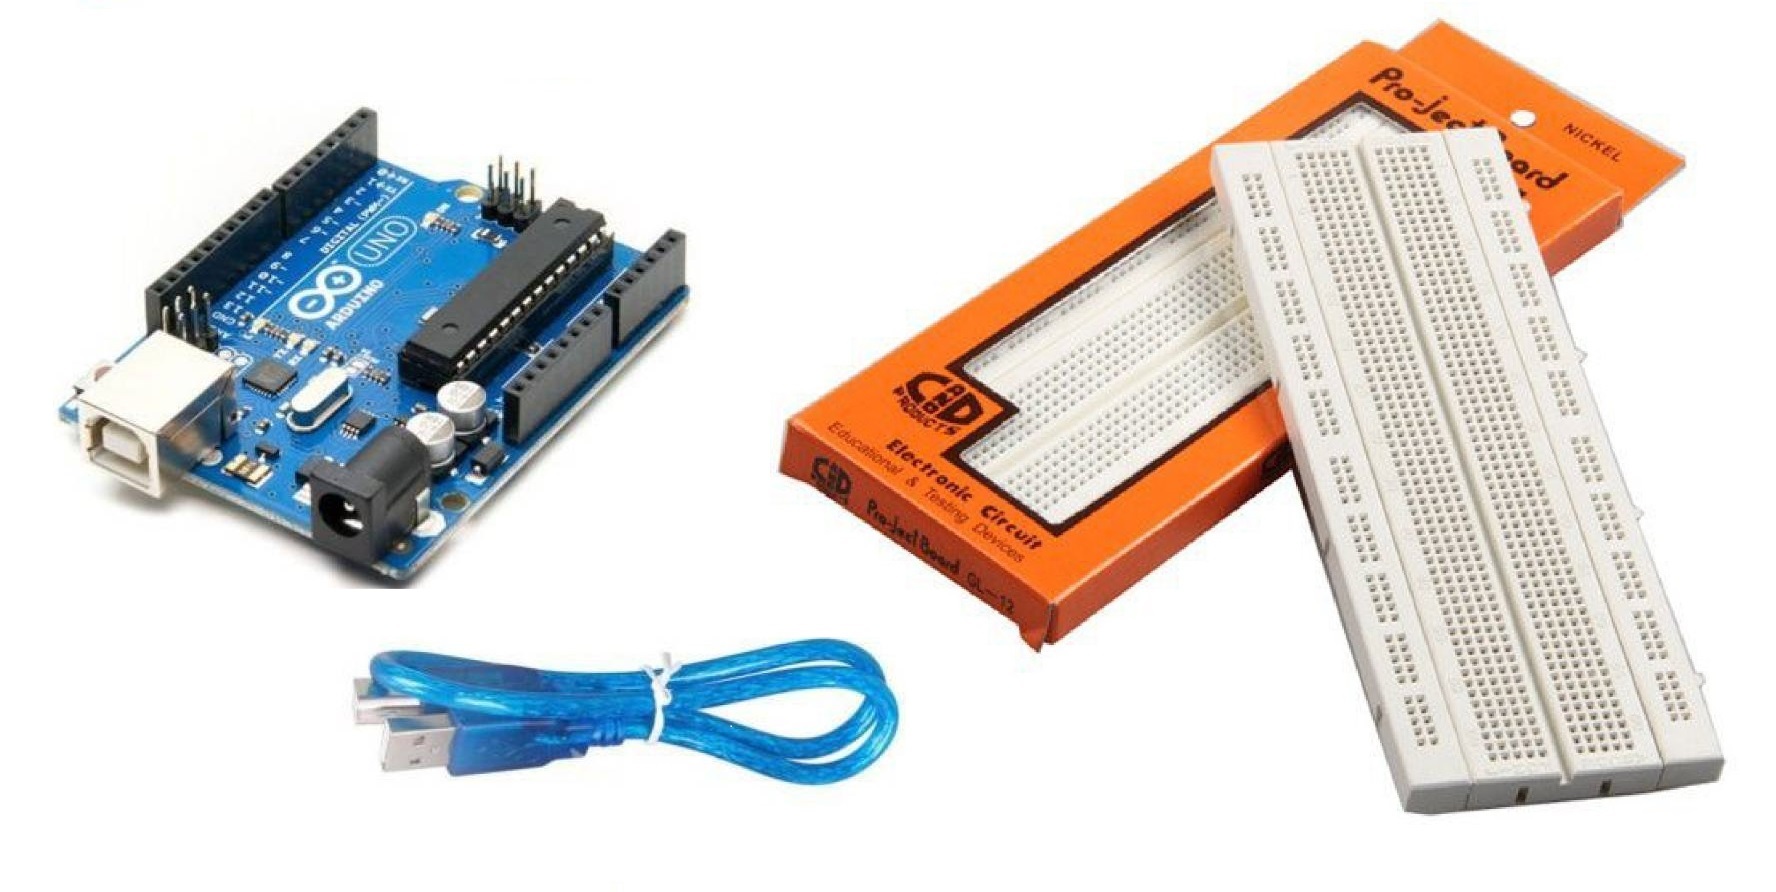 Arduino Uno R3 ATMega328 with 804 Point Breadboard & USB Cable Combo